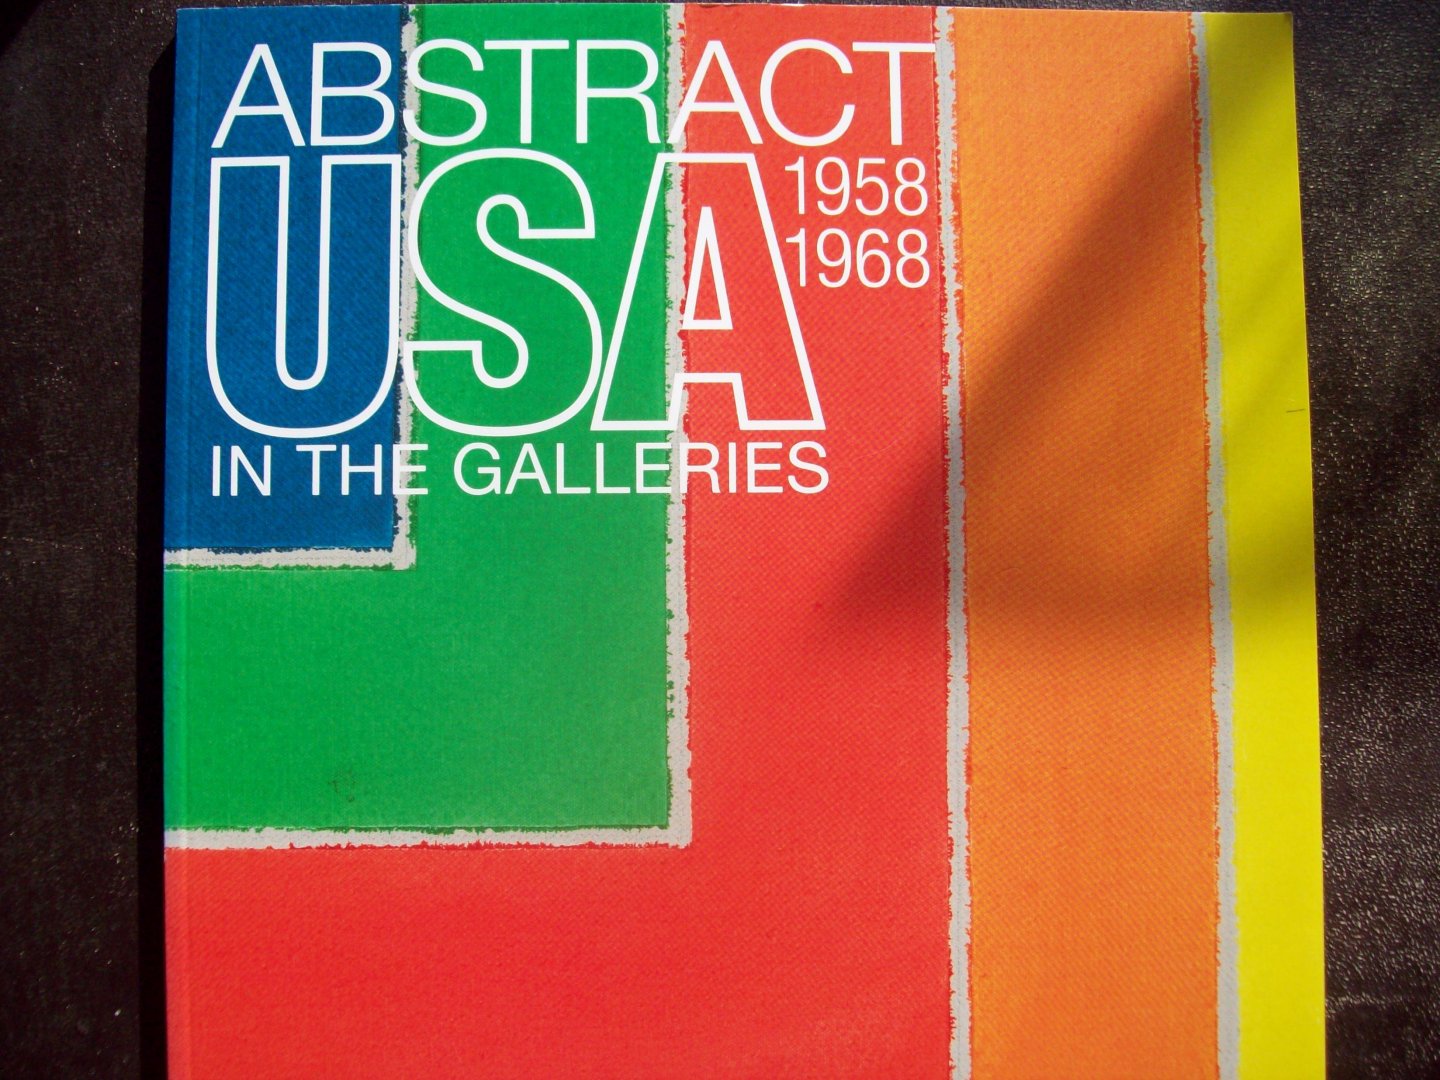 Wouter Davidts (inl.) - "Abstract USA in the Galleries 1958 - 1968 "